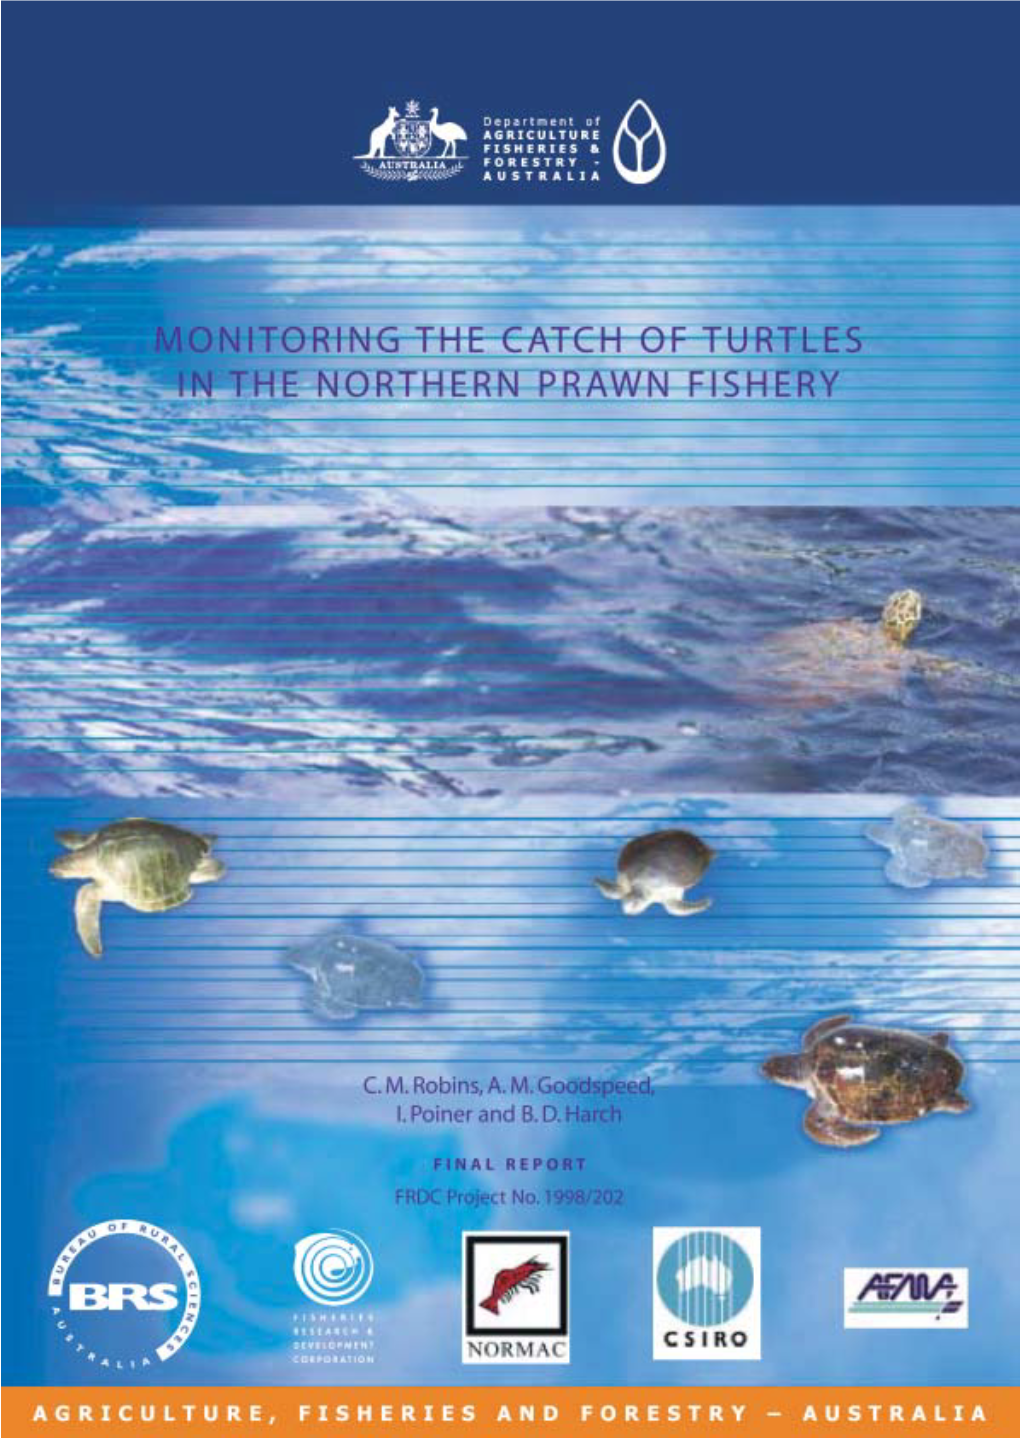 Monitoring the Catch of Turtles in the Northern Prawn Fishery